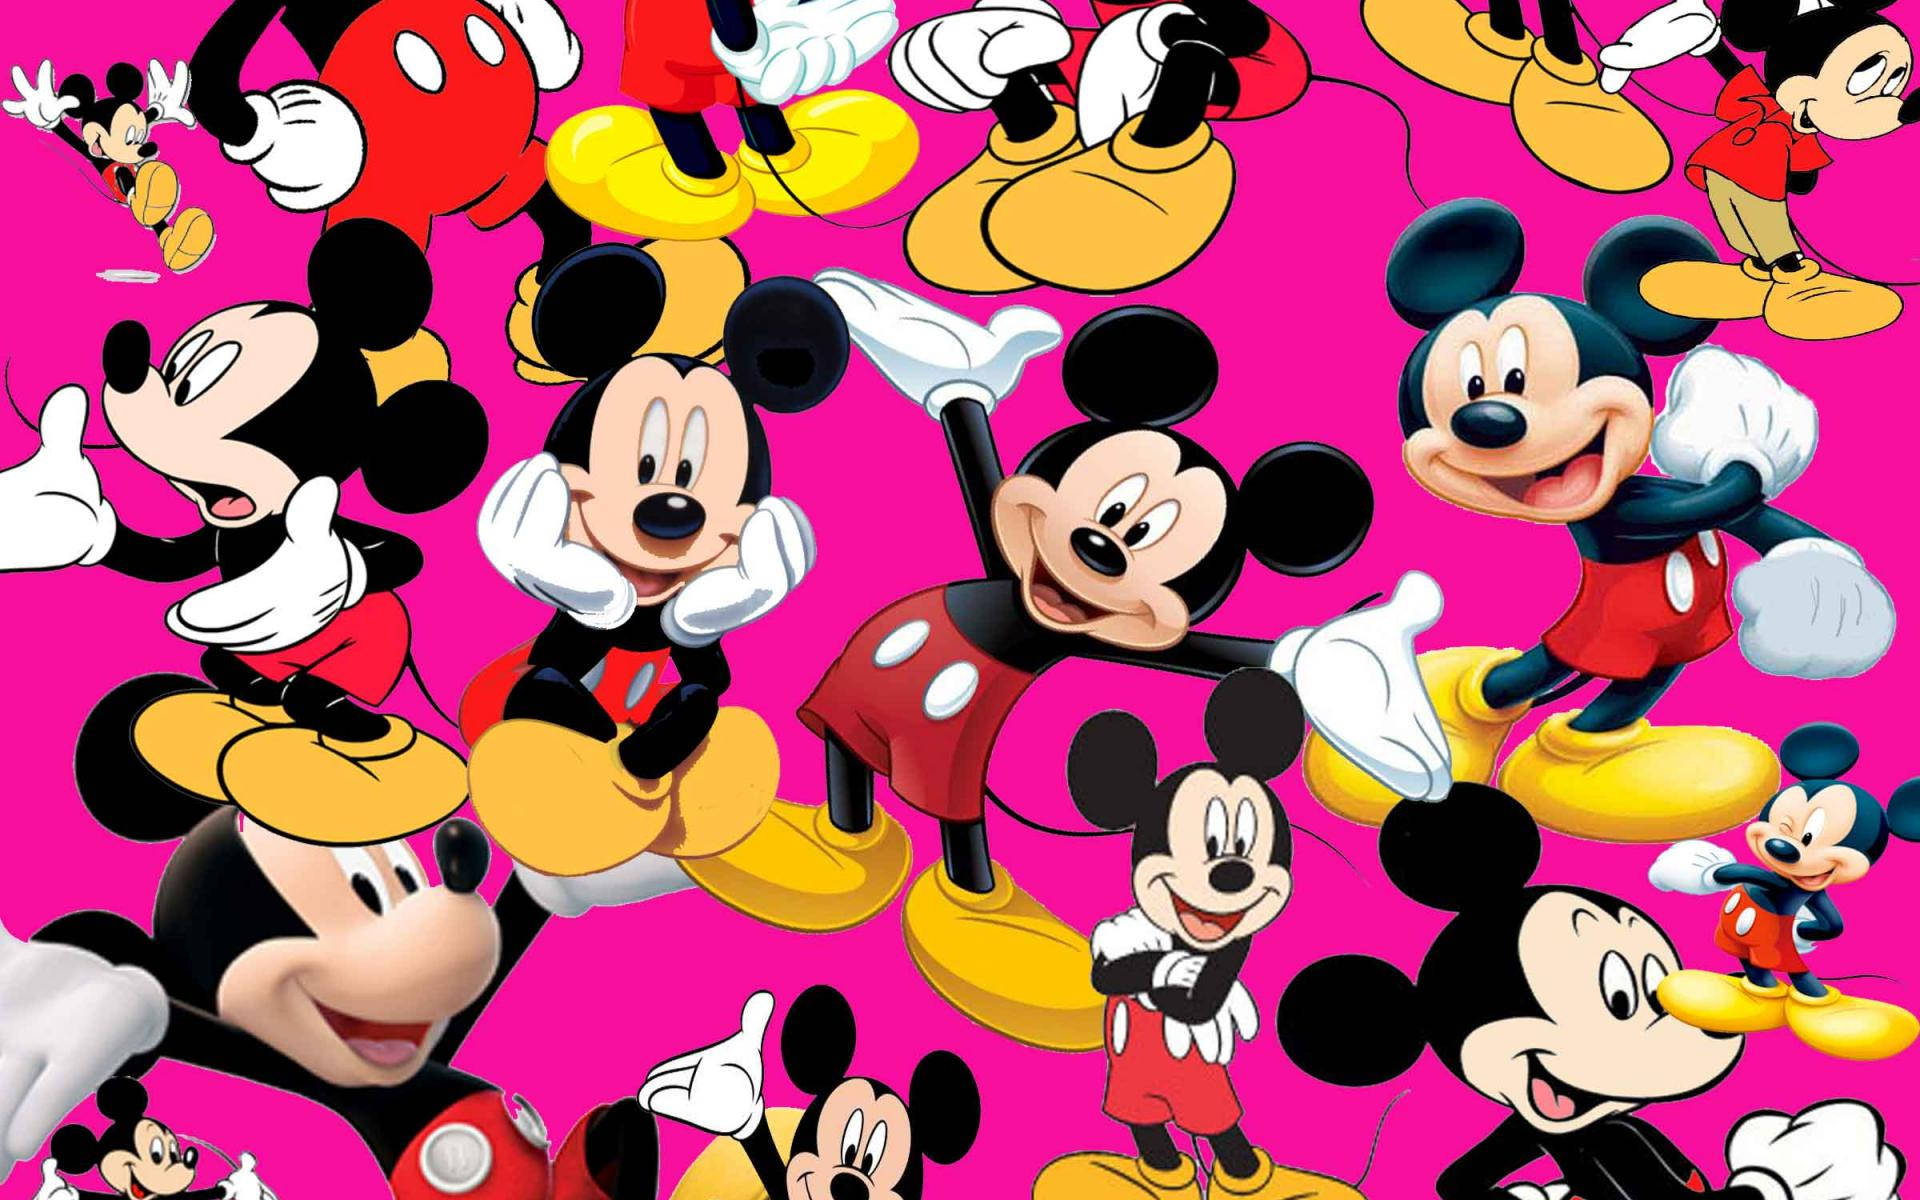 Celebrate the Iconic Disney Mouse - Mickey Mouse! Wallpaper